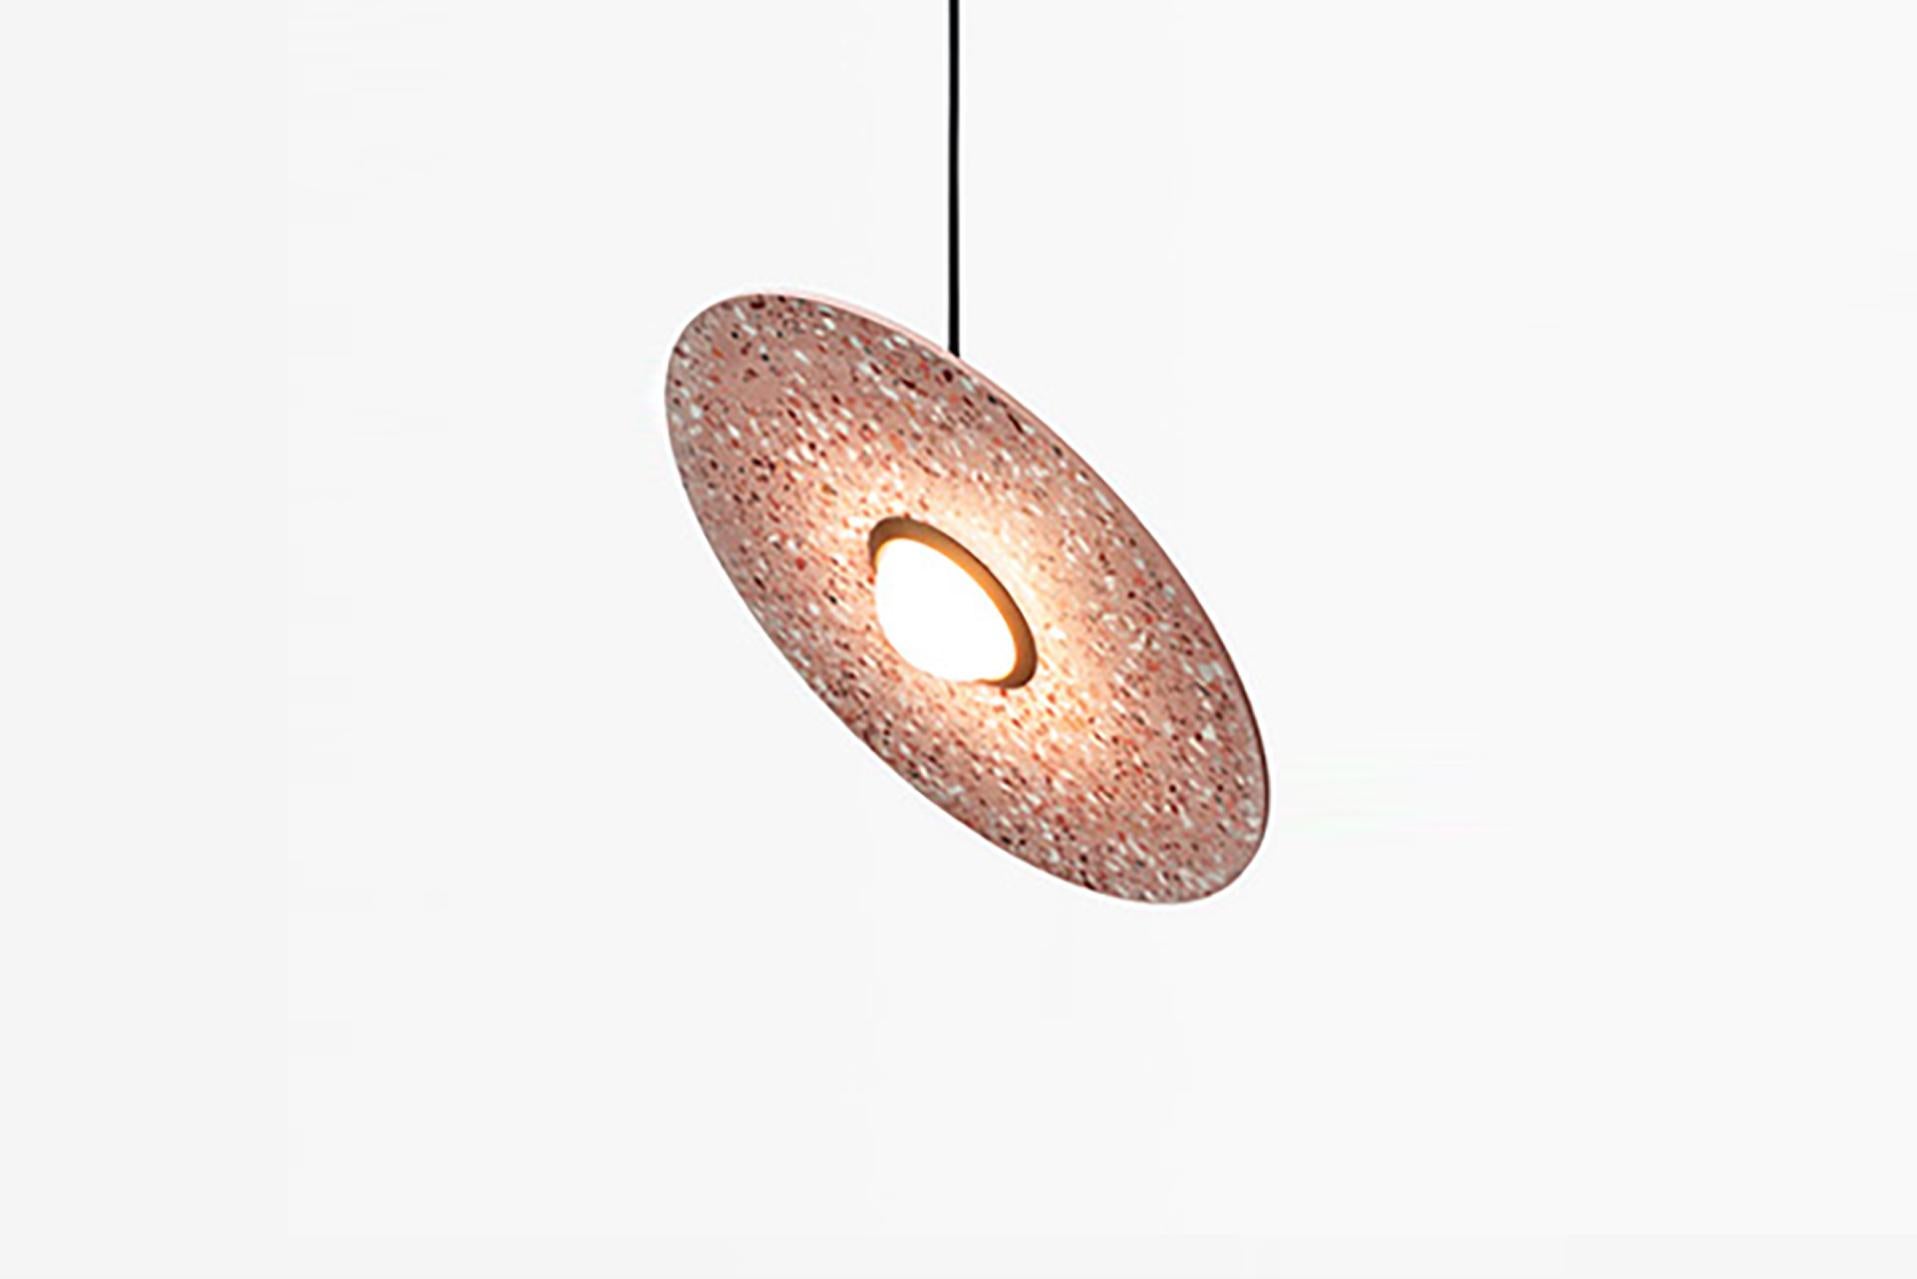 Terrazzo pendant lamps designed by Cantonese studio Bentu Design

Black wire 2m adjustable. Bulb G4 LED / 220V / 3W
Measures: Ø 45 × H 15.5 cm

These pendant lamps are available in different colors of terrazzo: White, black, red or blue.

Bentu